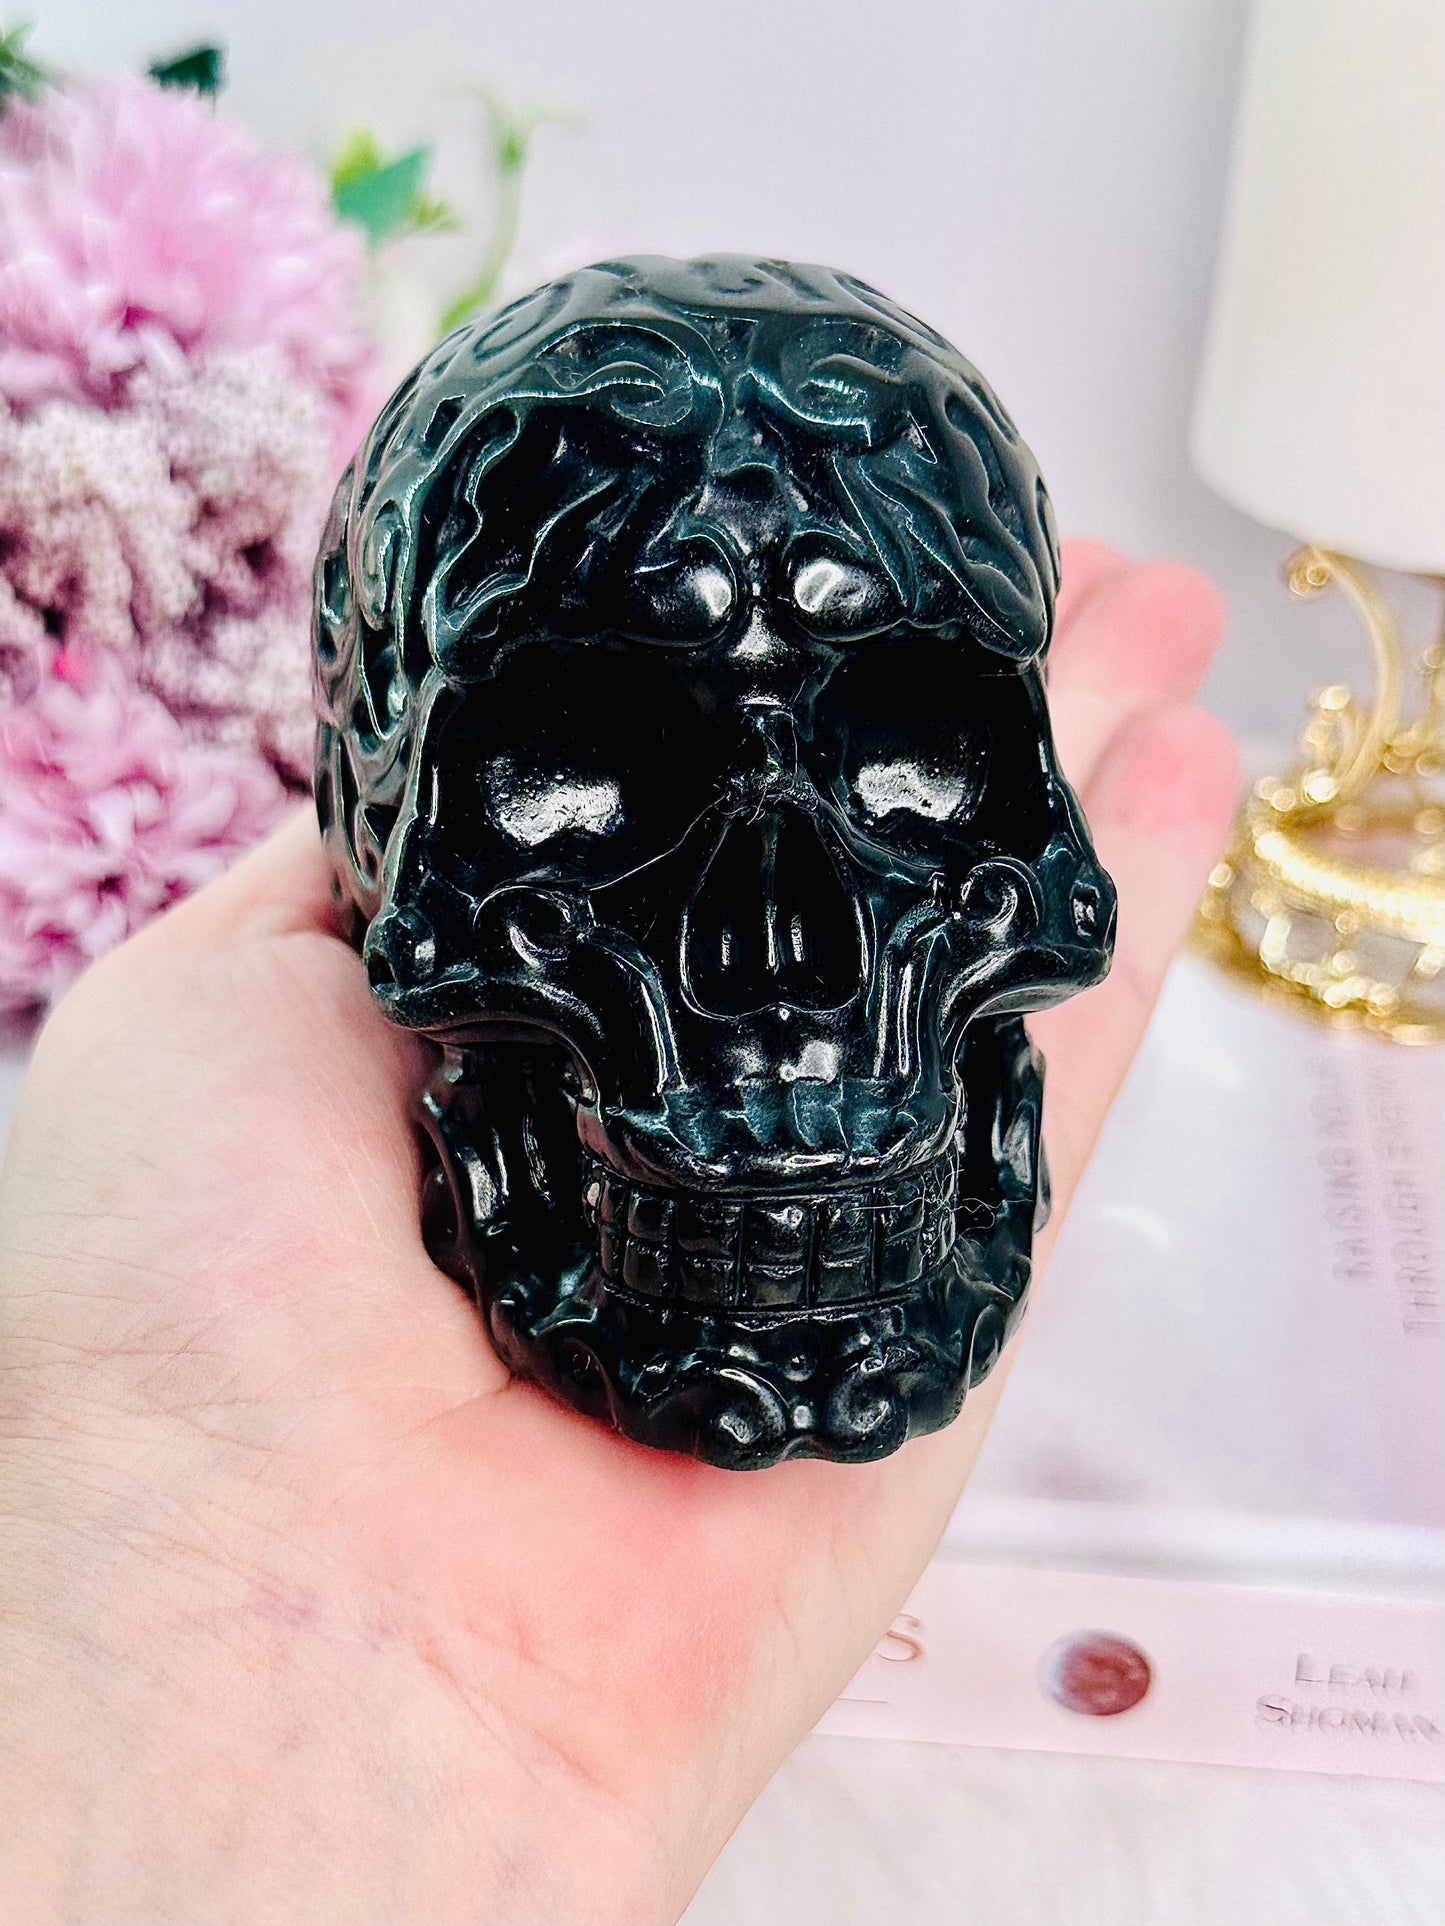 My Personal Favourite!!! Large Stunning Carved Black Obsidian Skull 575grams Absolutely Unbelievable Gorgeous & Perfect